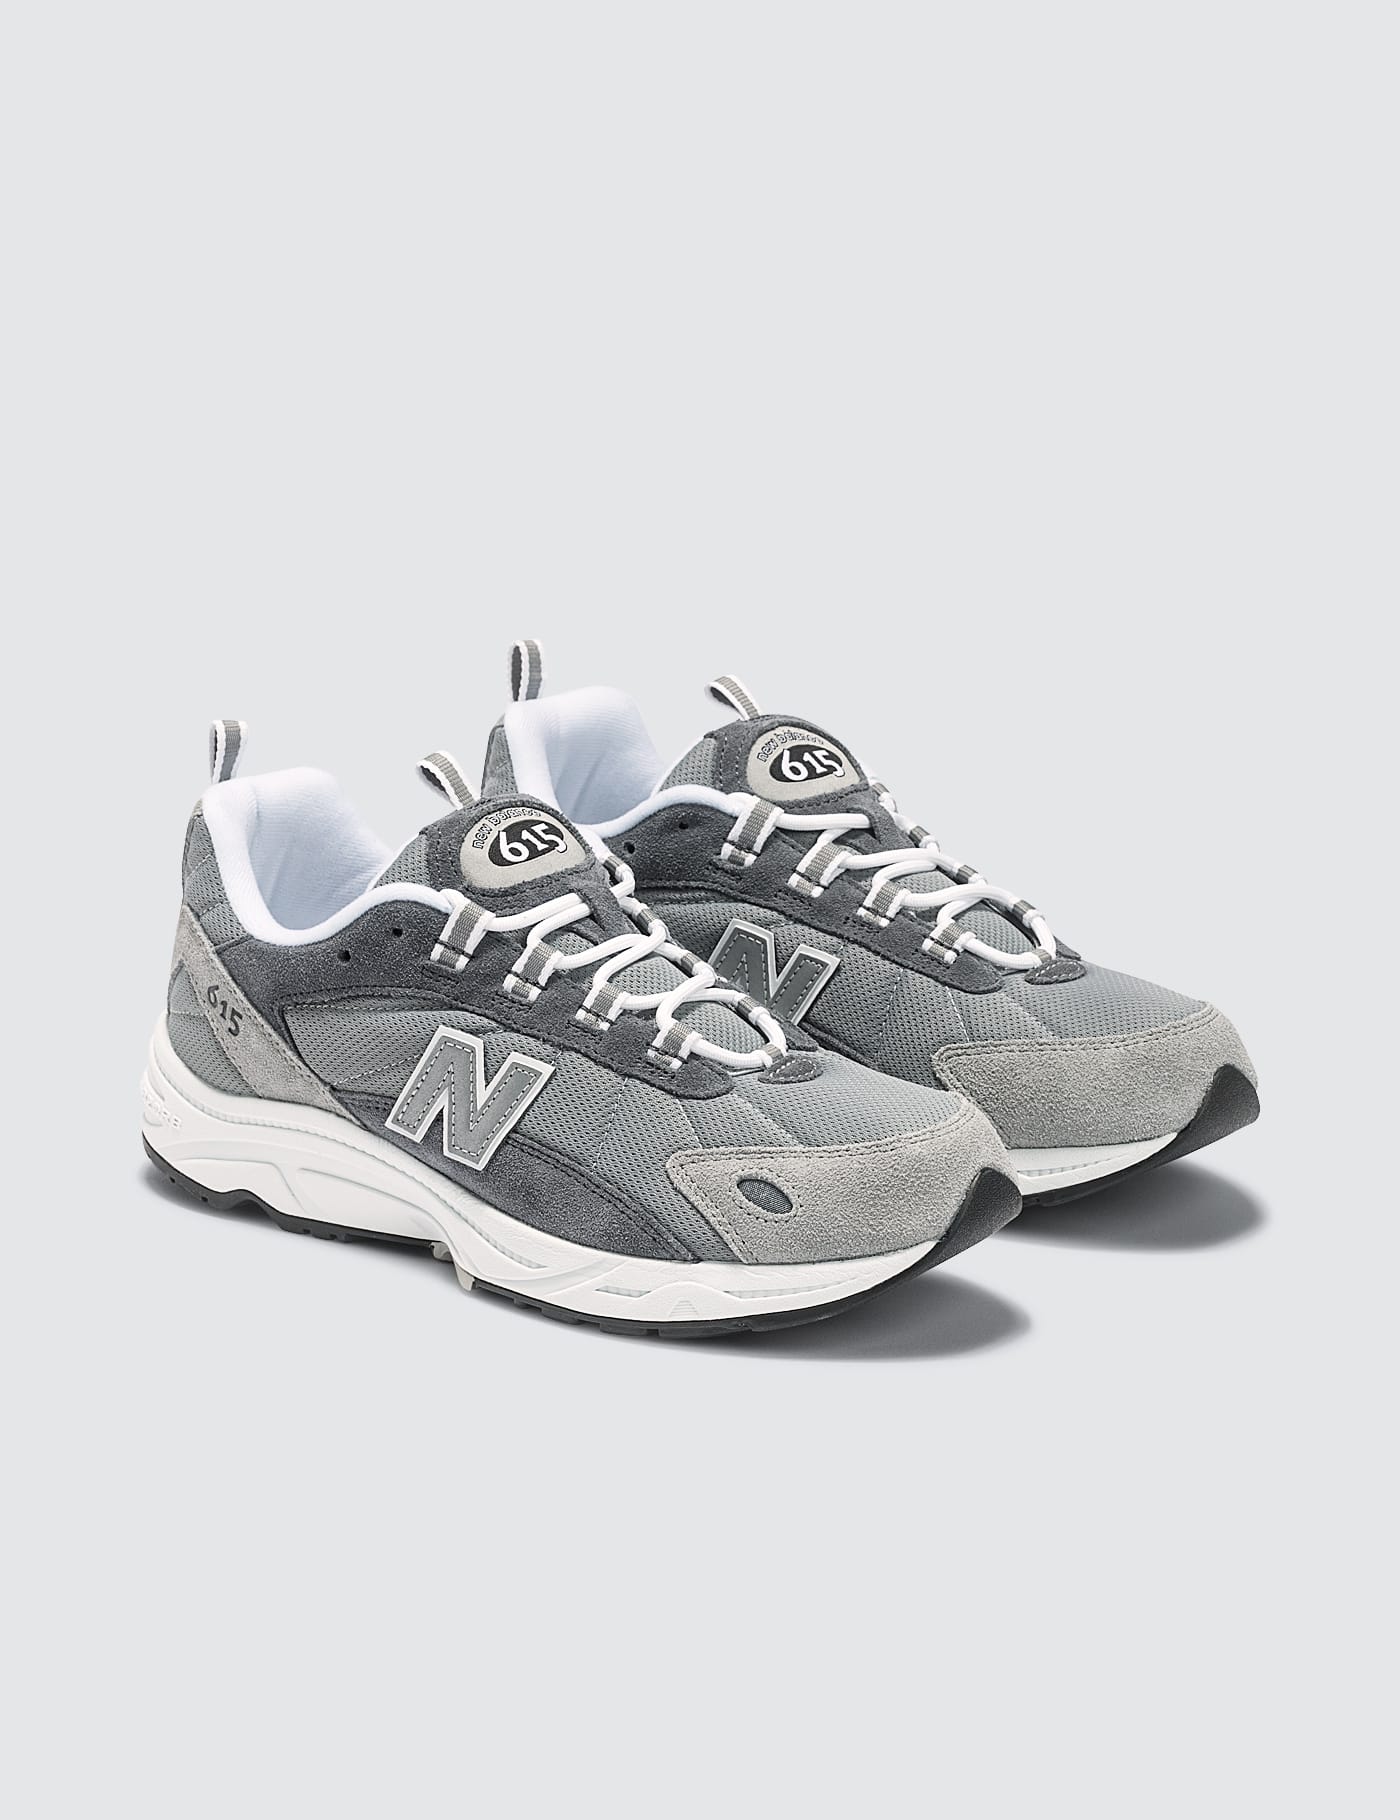 New Balance - 615 | HBX - Globally Curated Fashion and Lifestyle ...